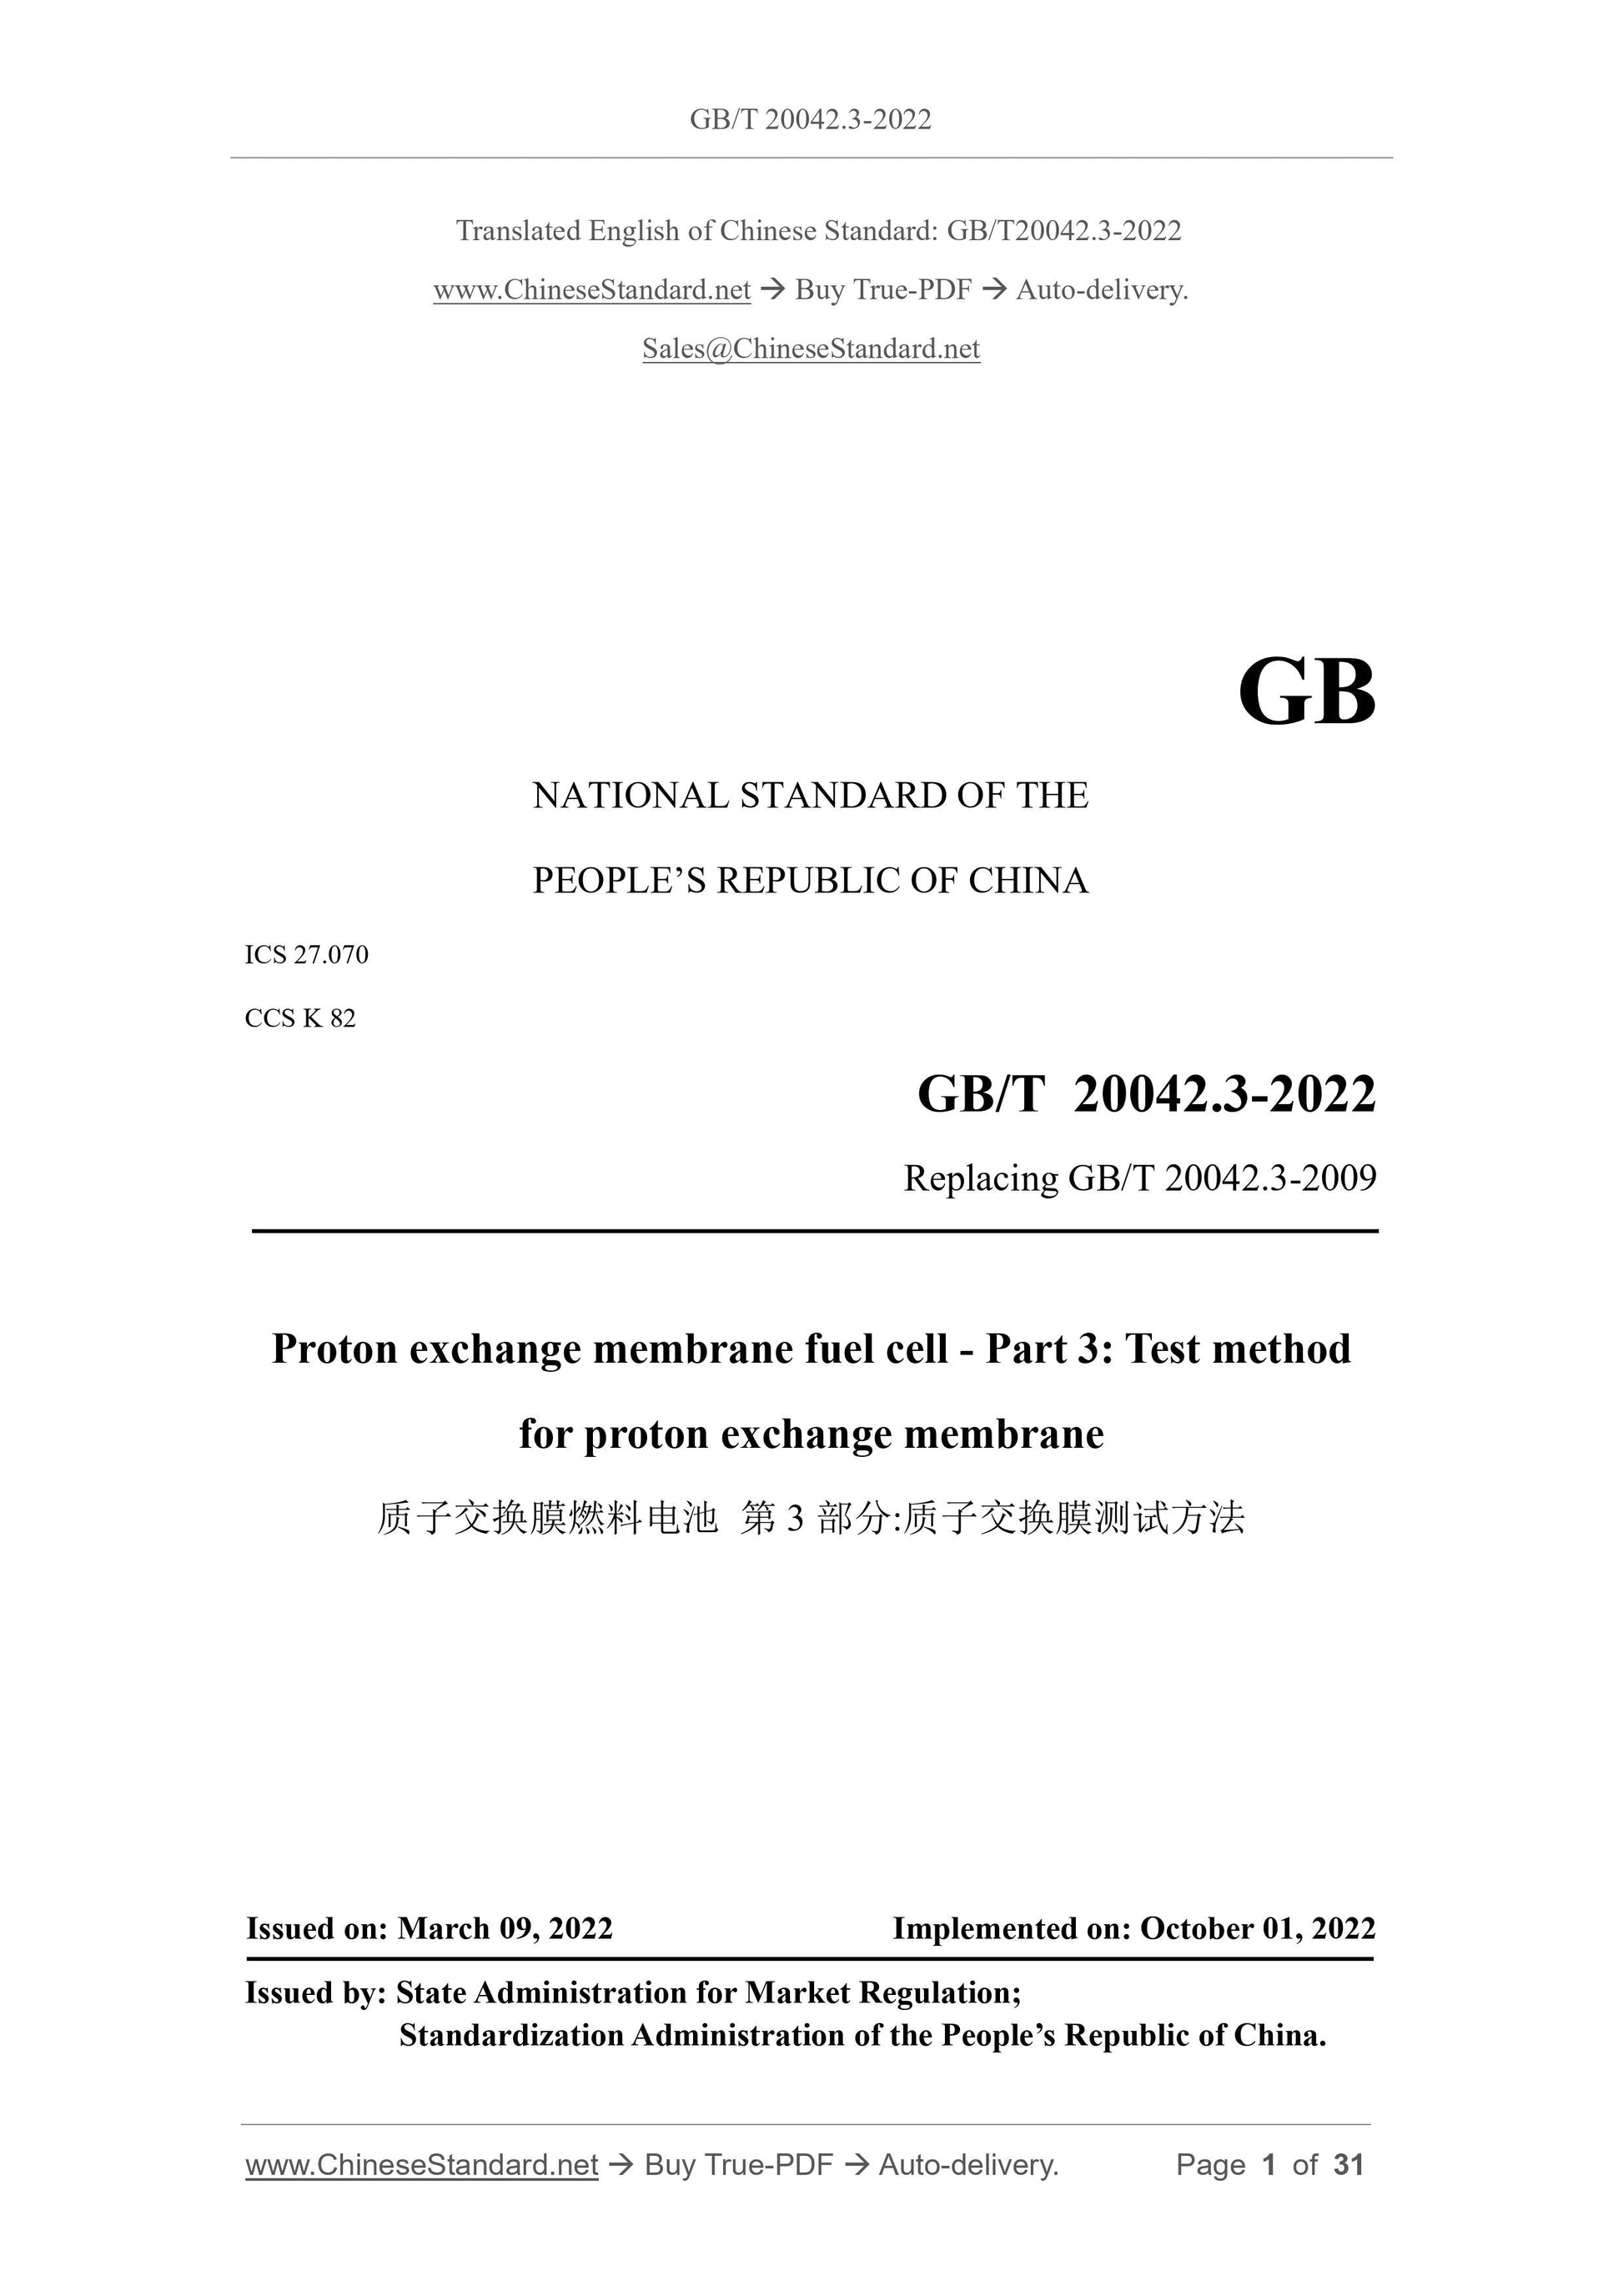 GB/T 20042.3-2022 Page 1